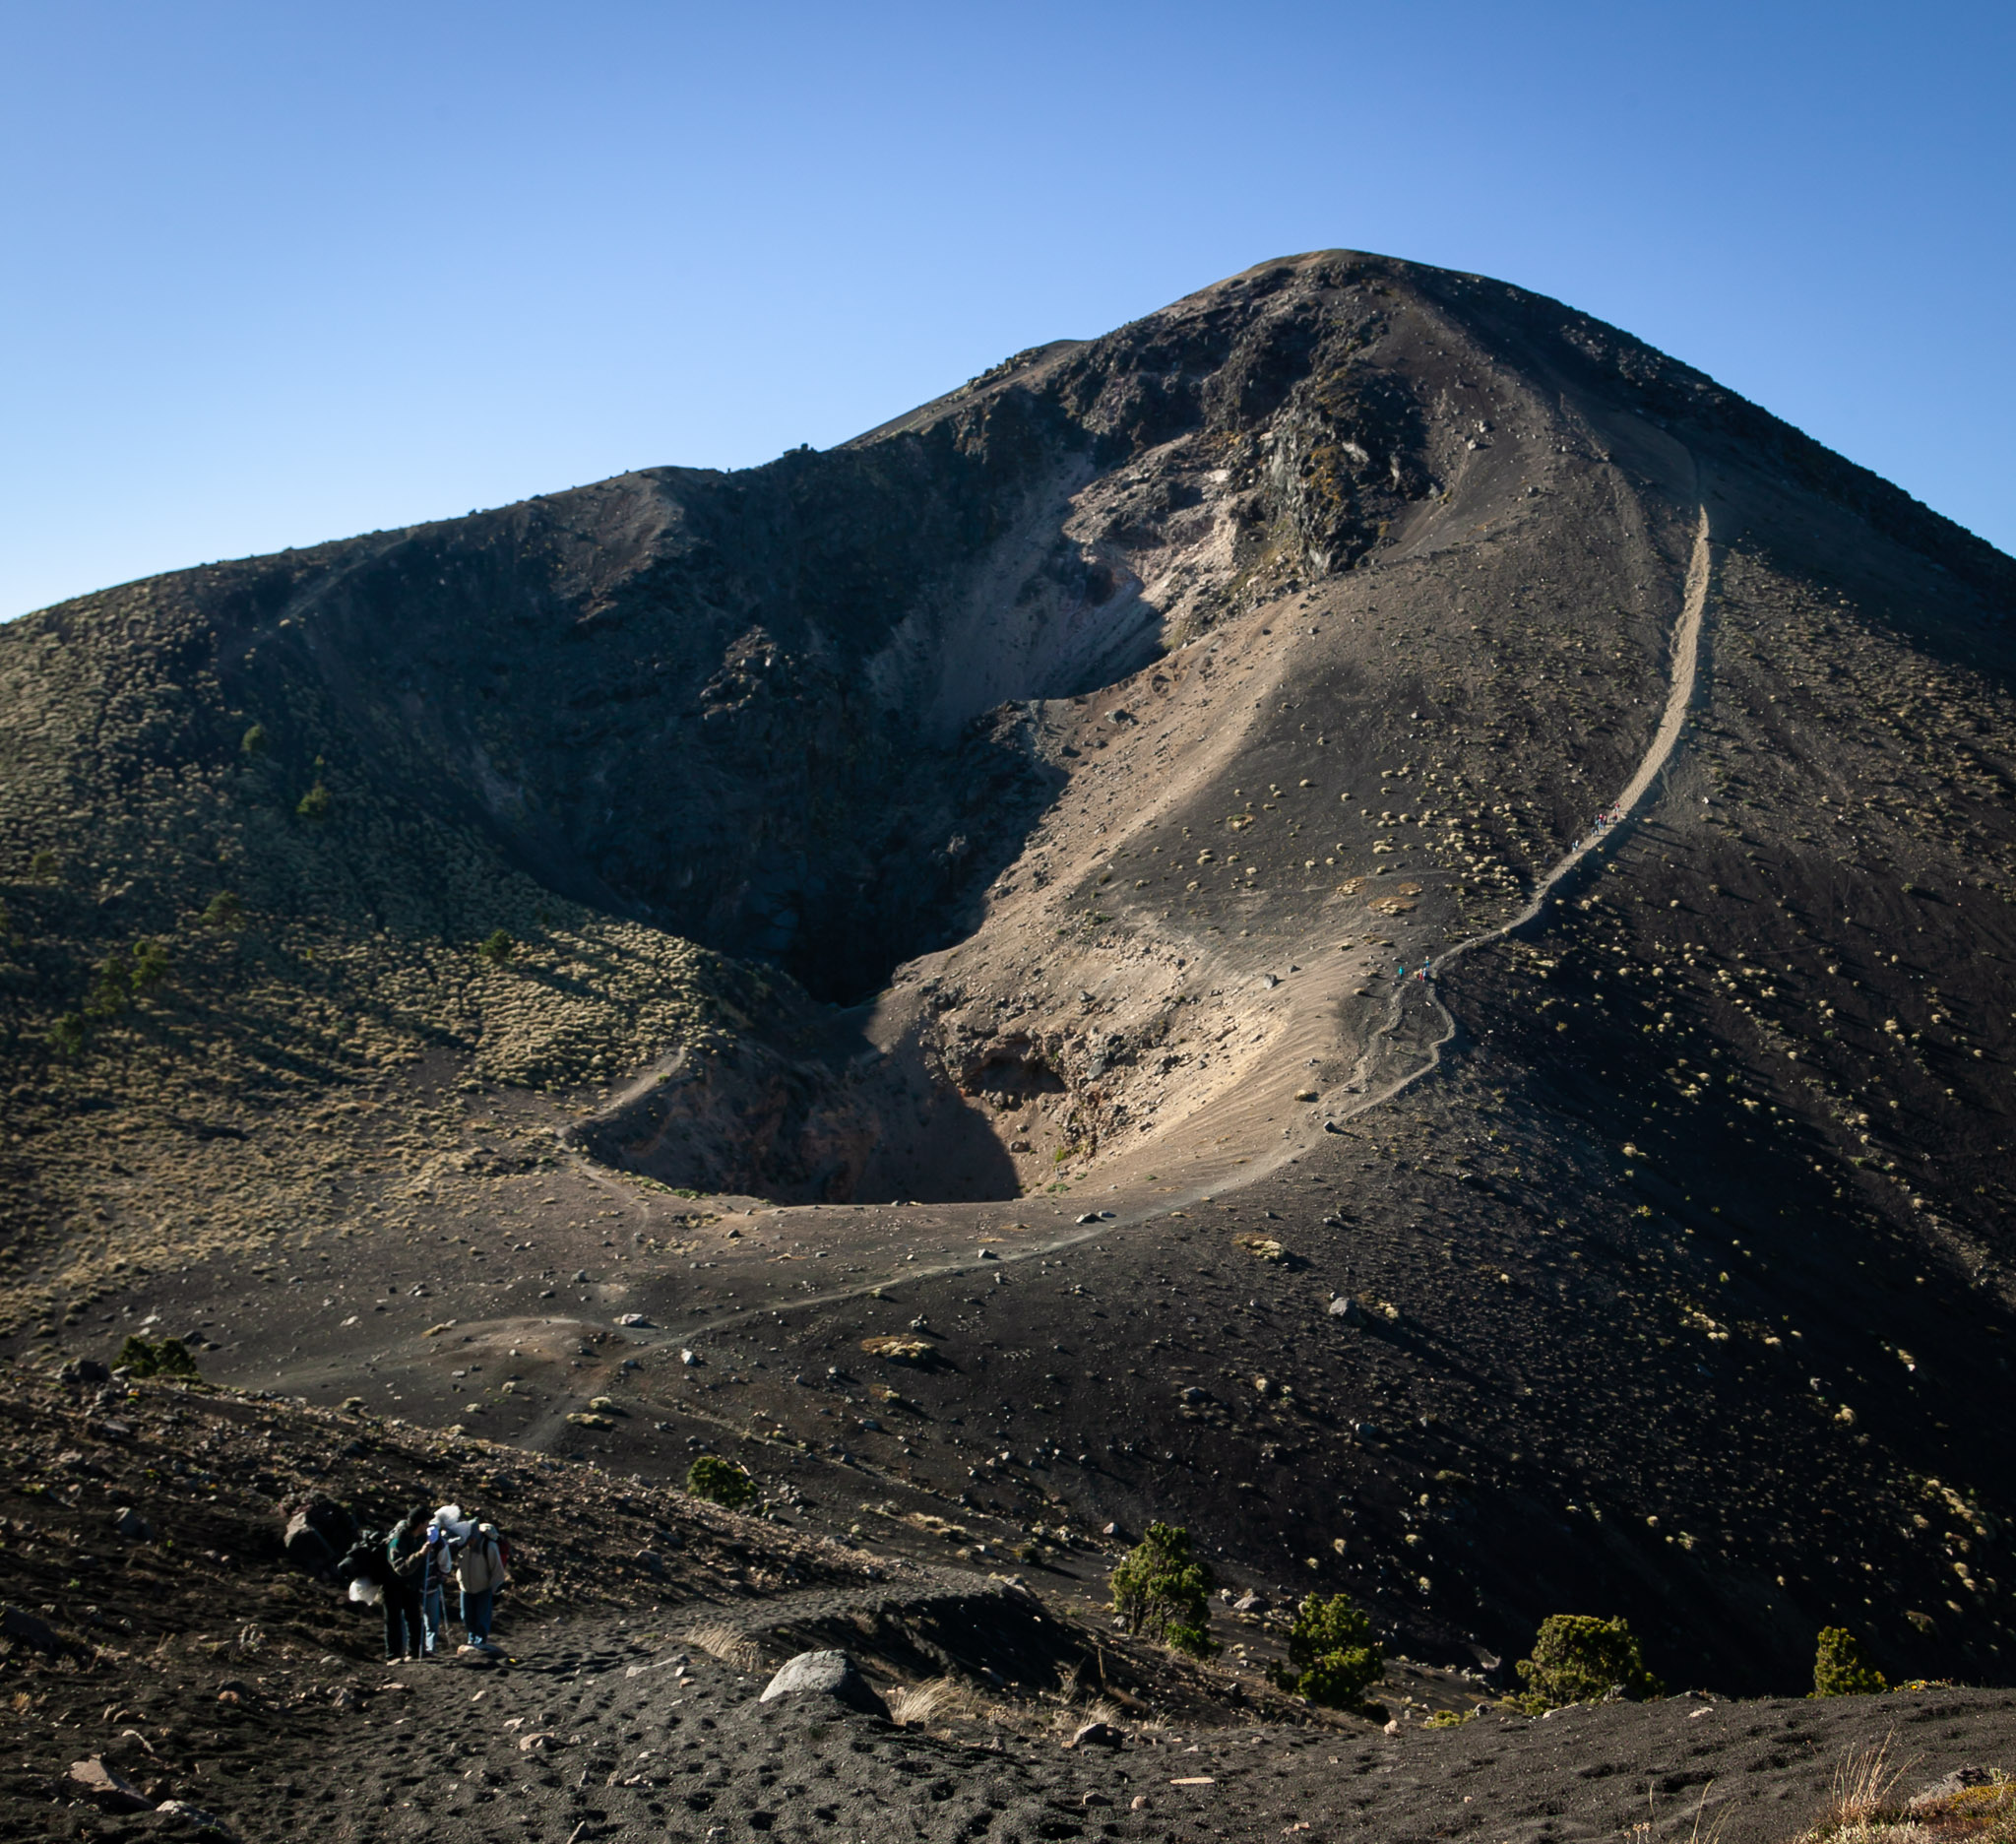 Leaving the main crater